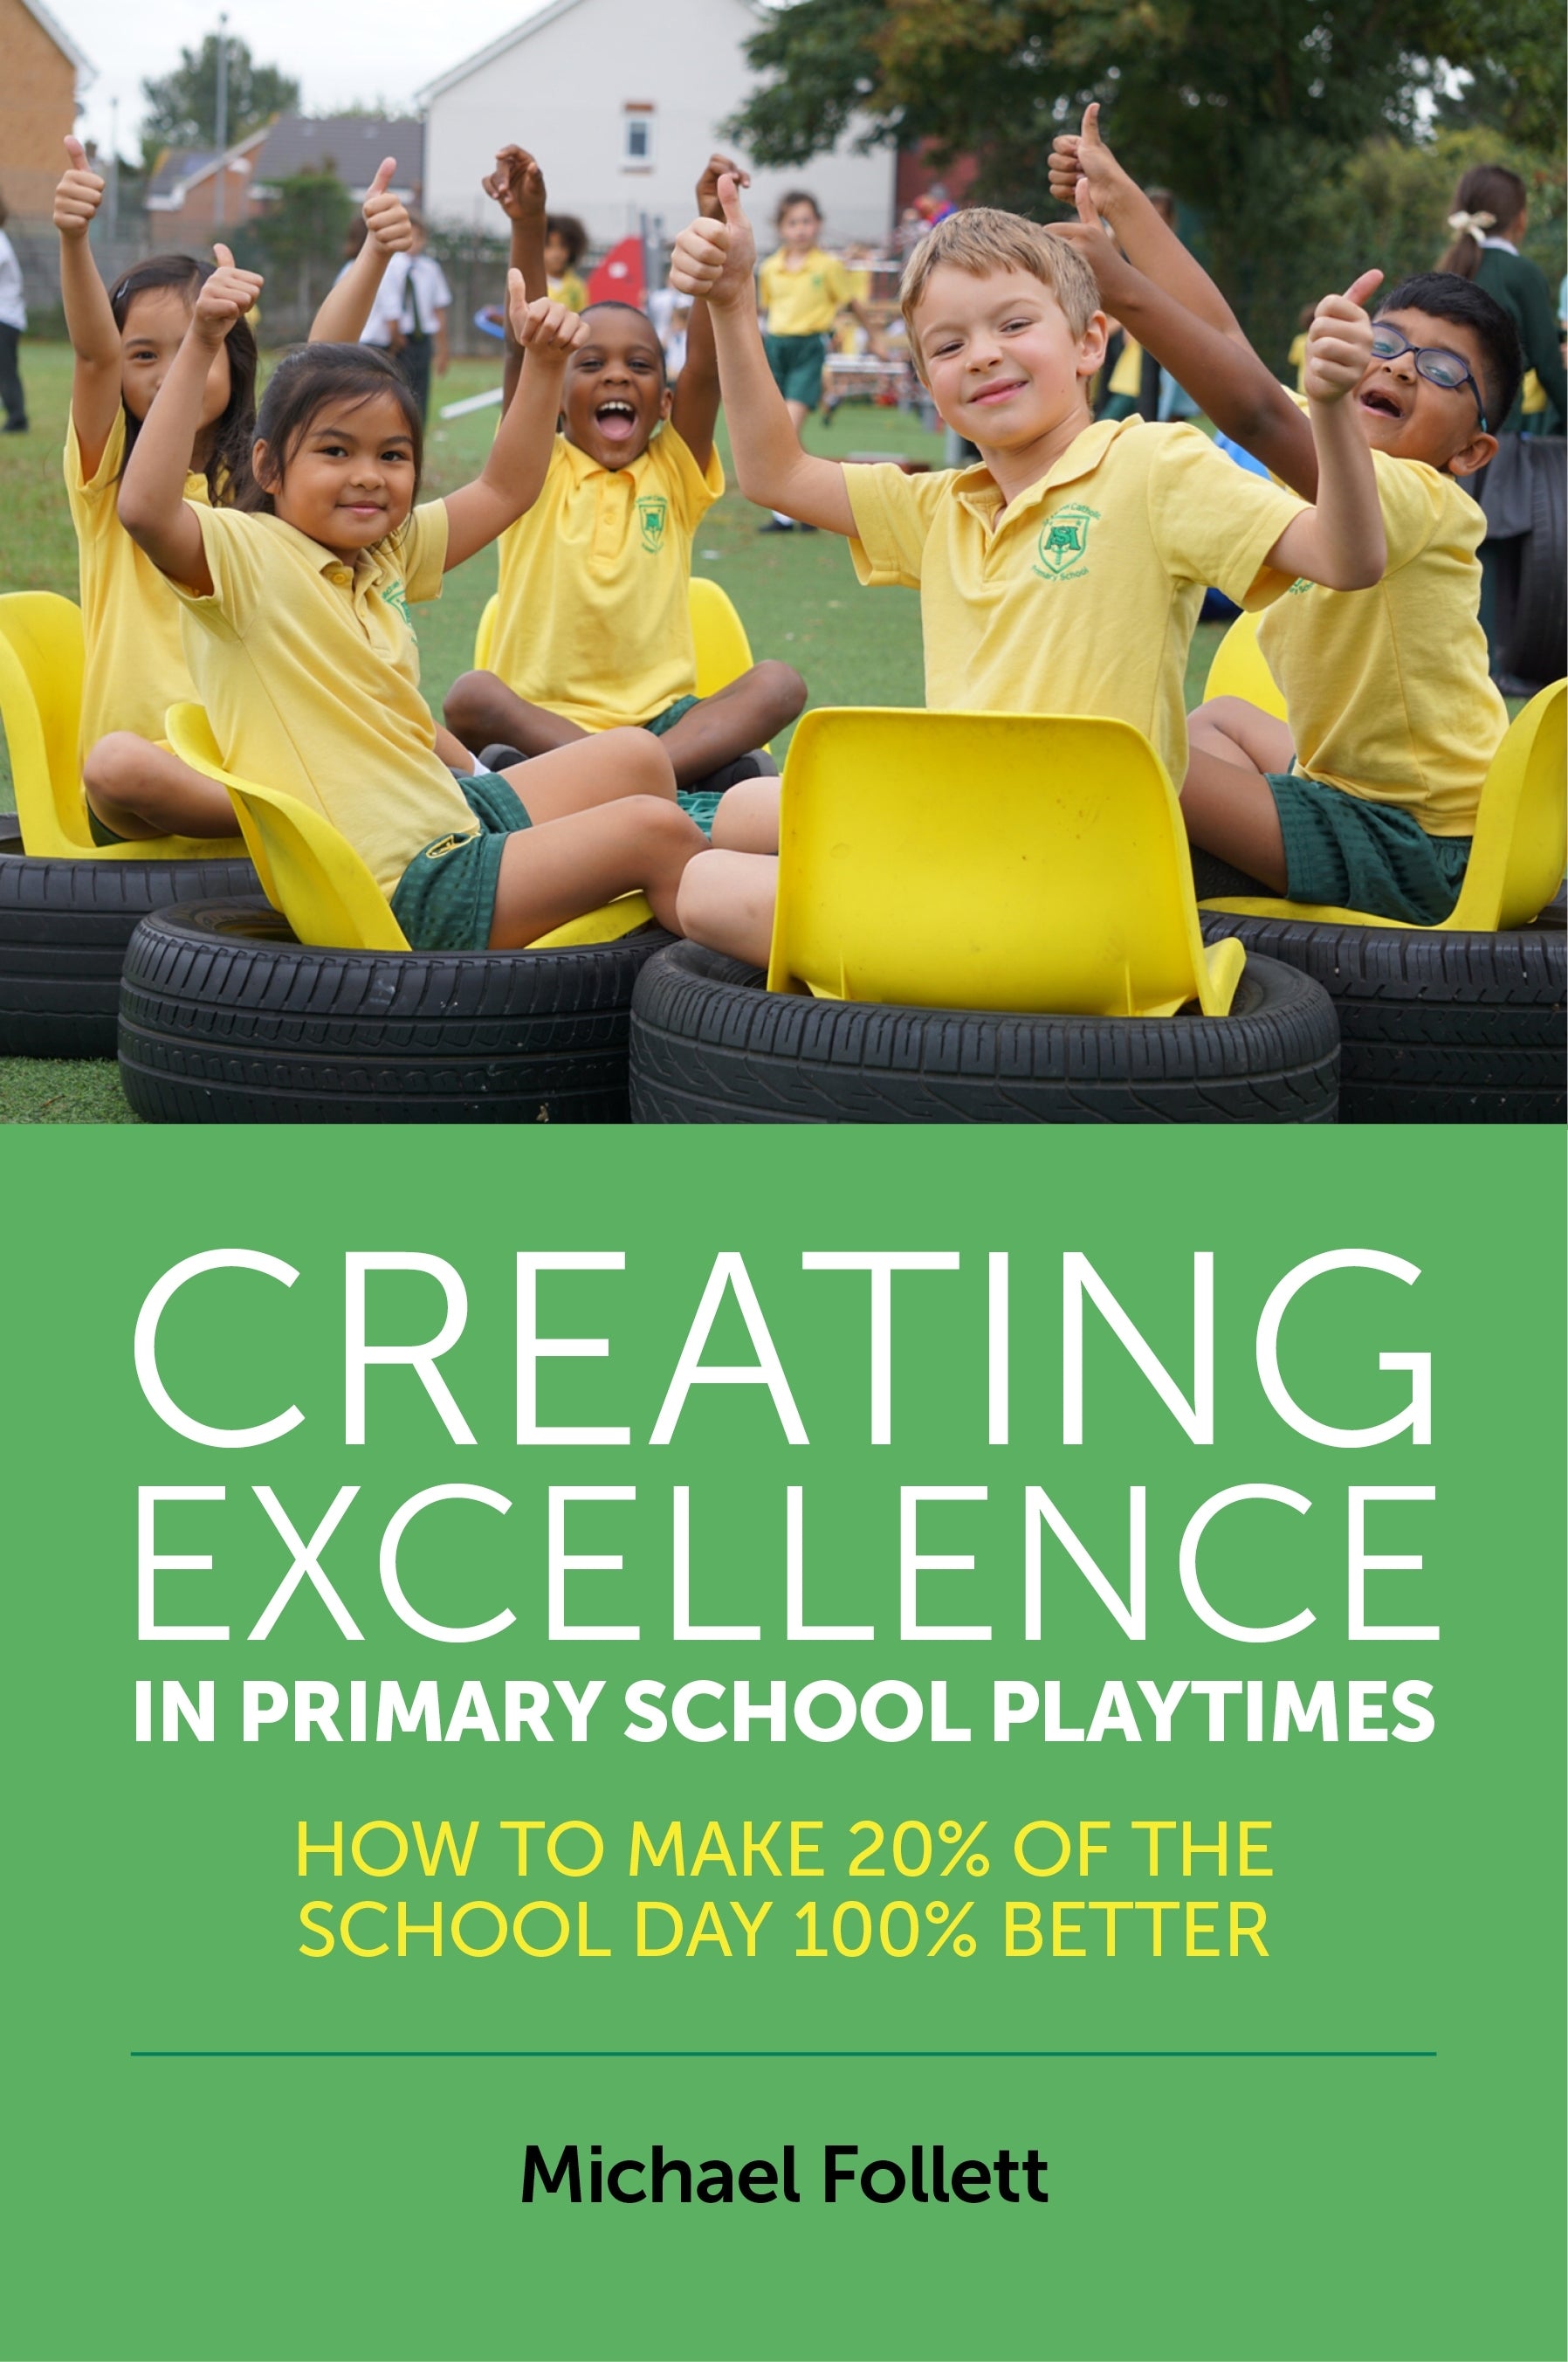 Creating Excellence in Primary School Playtimes by Michael Follett